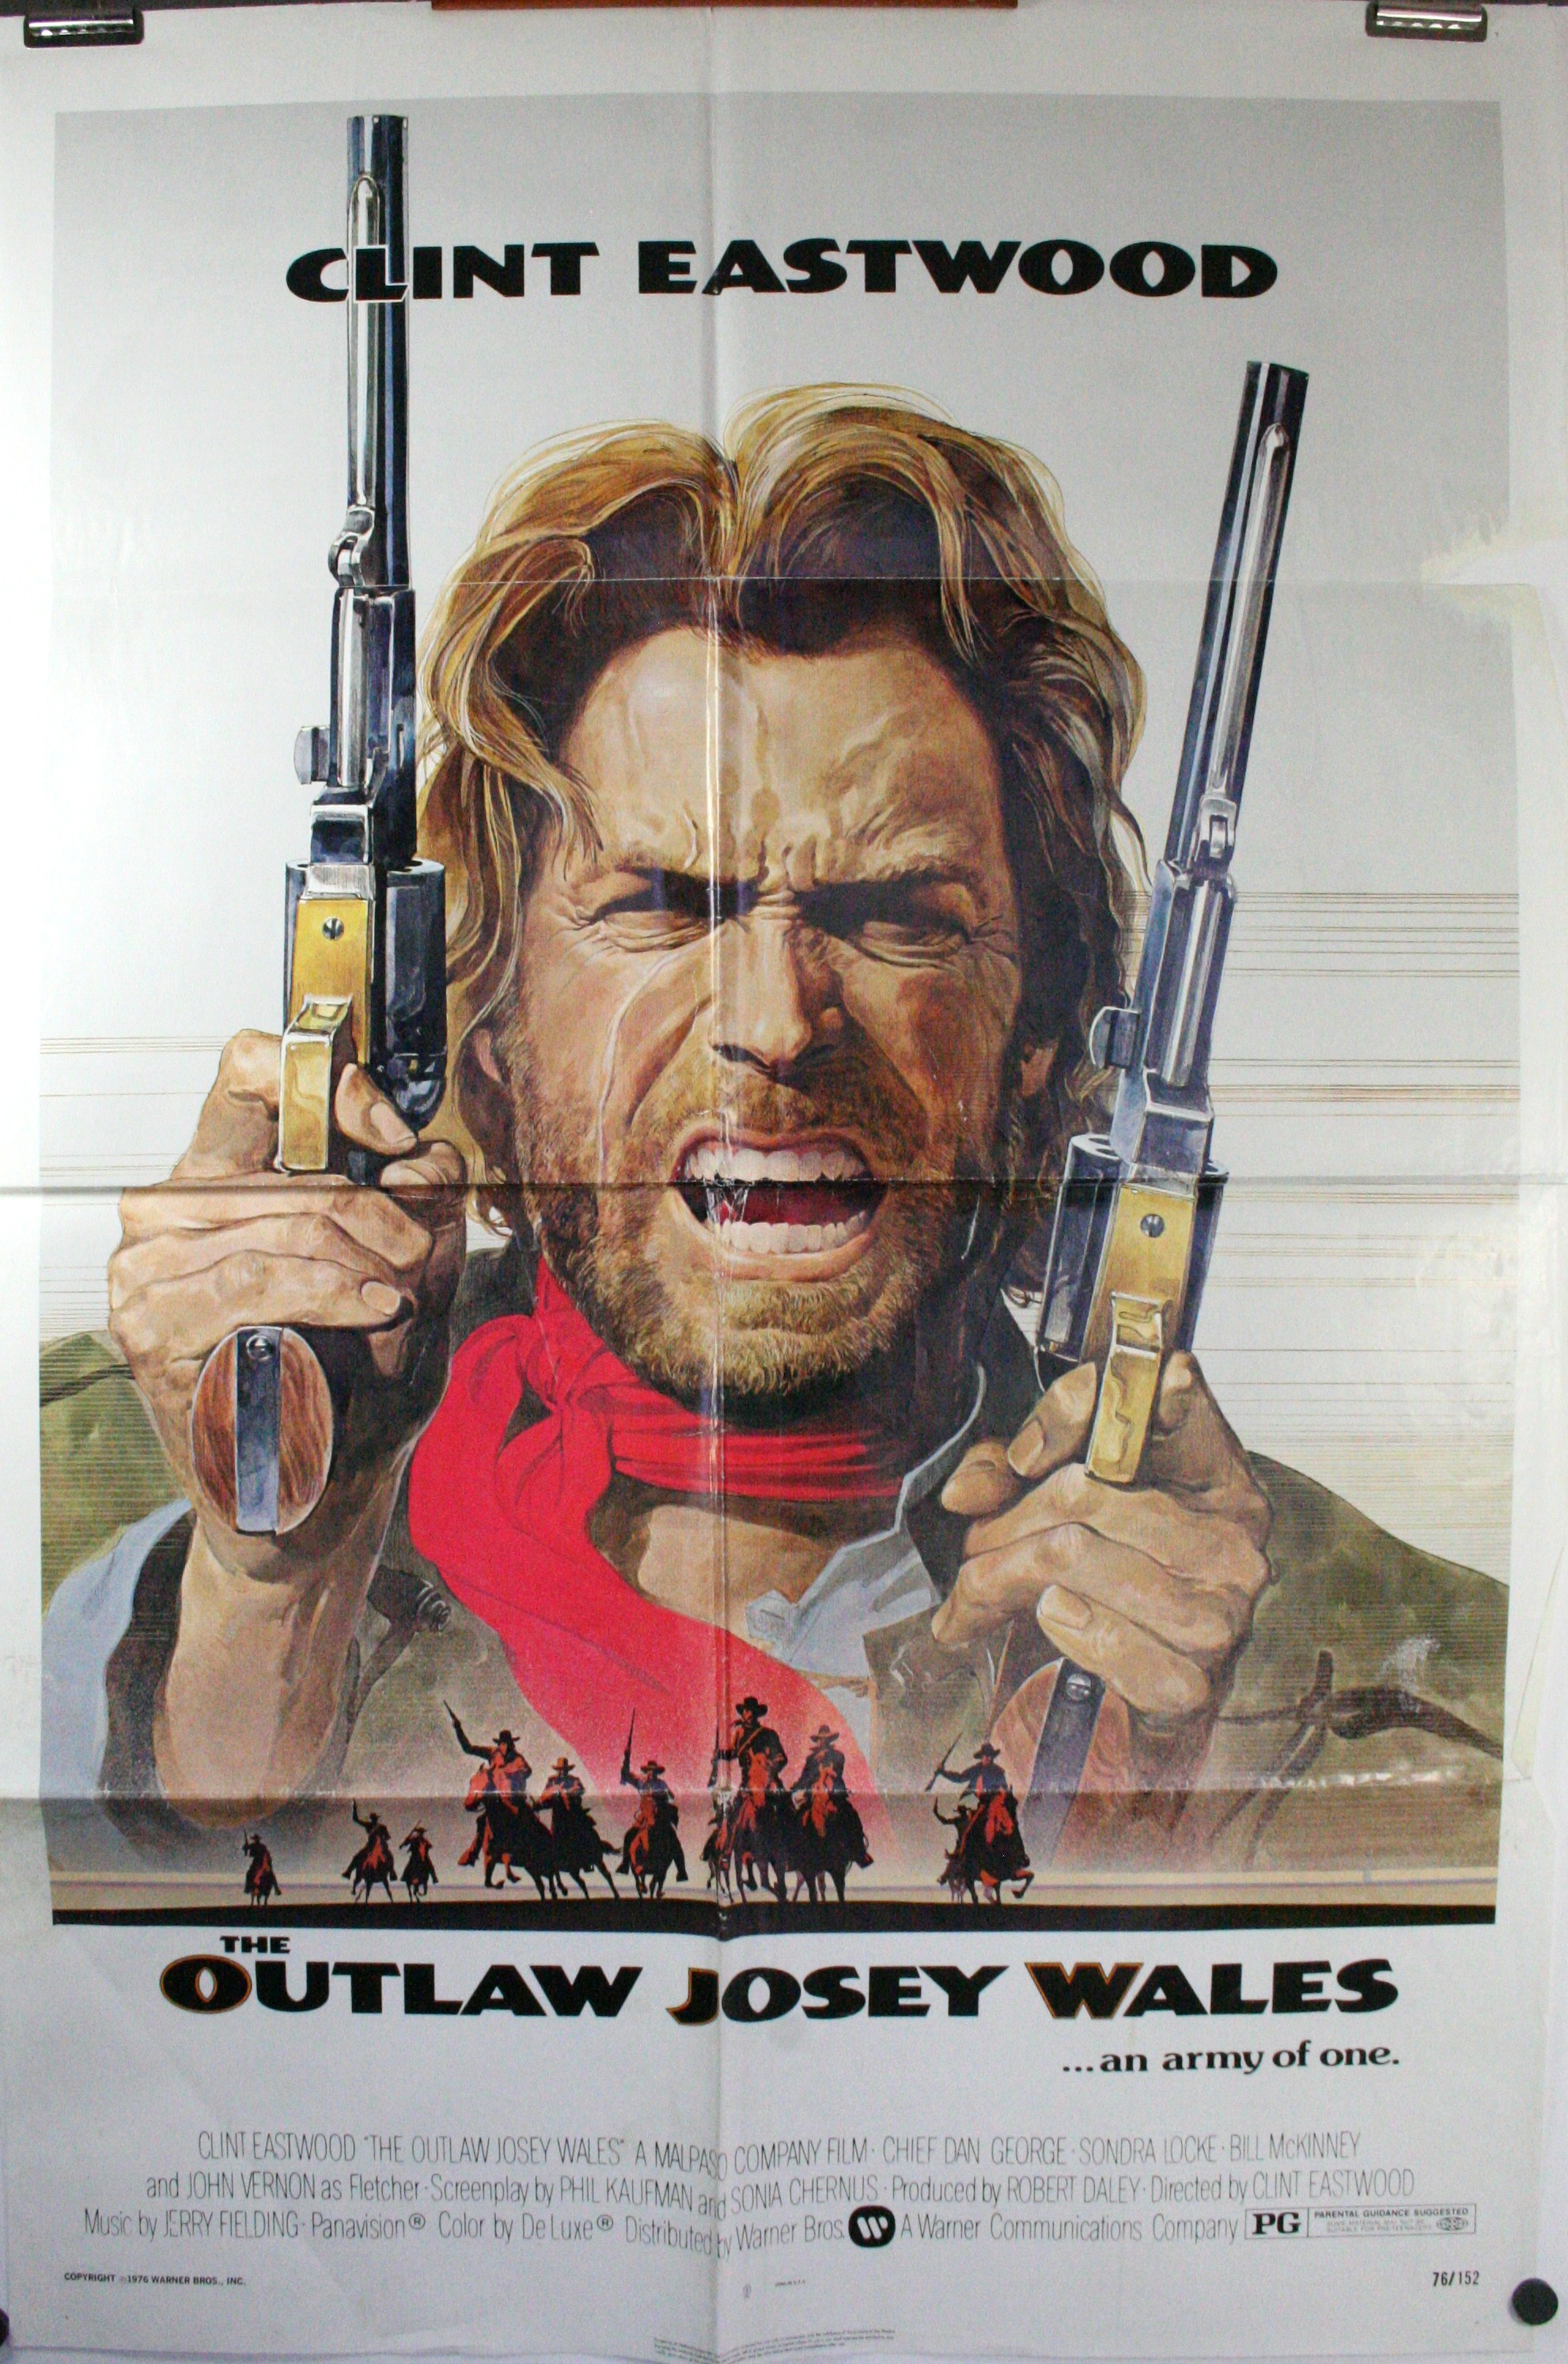 Large Size Clint Eastwood The Outlaw Josey Wales Vintage Movie